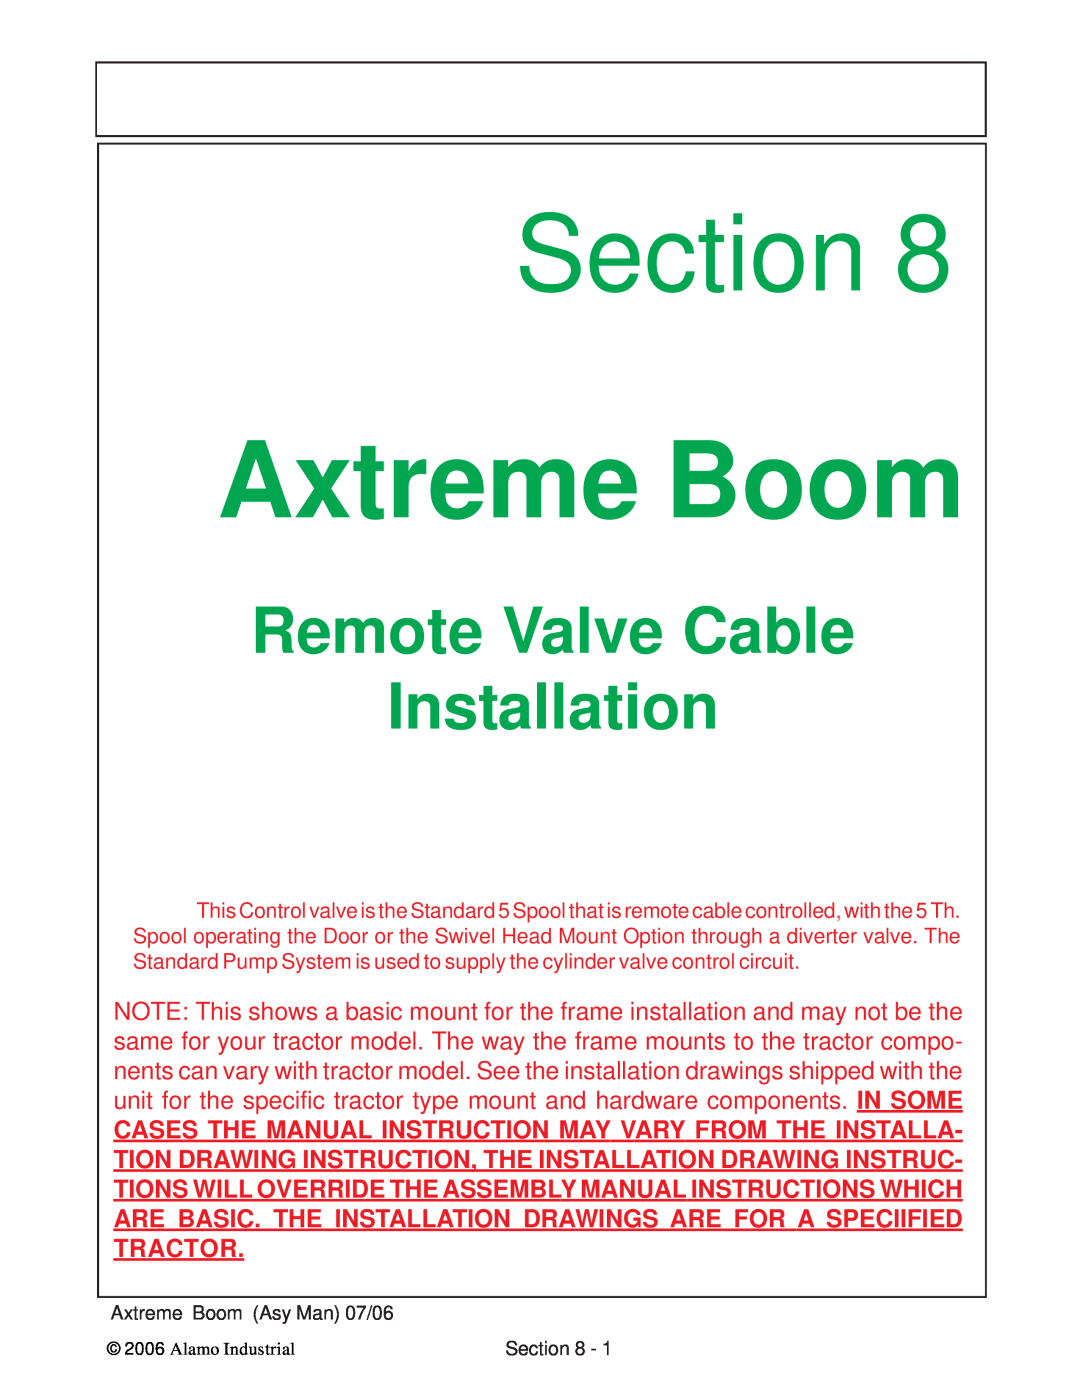 Alamo 02984405 instruction manual Remote Valve Cable Installation, Section, Axtreme Boom 